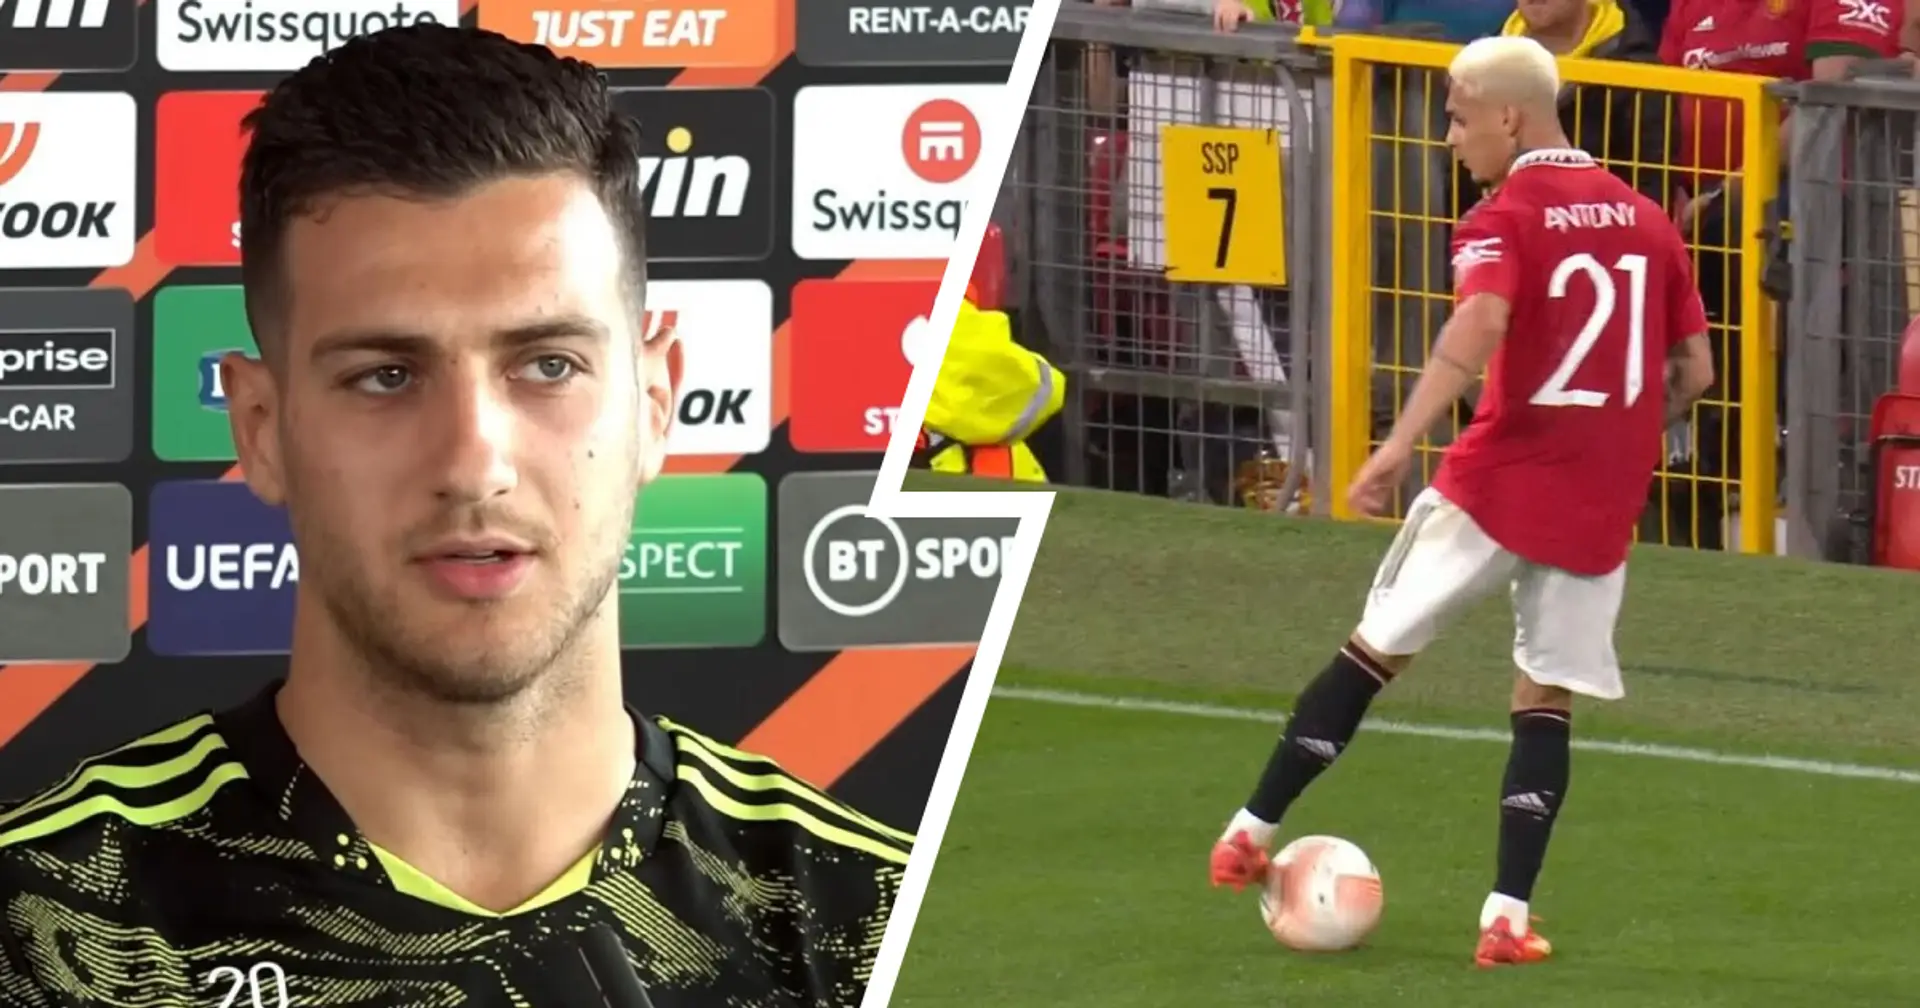 Dalot defends Antony showboating: 'We're happy to have a player like him'